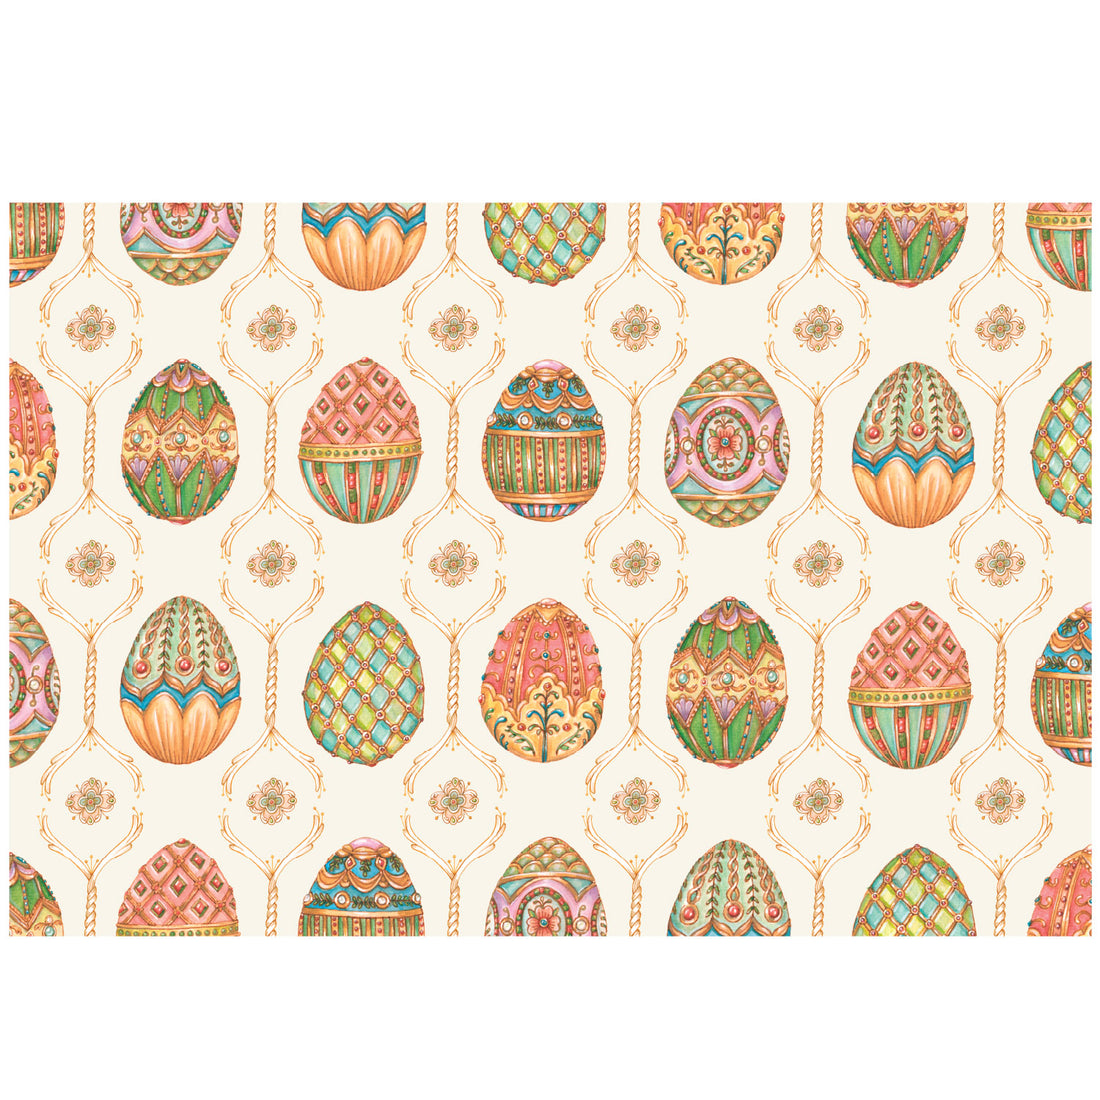 Guests mesmerized by Exquisite Egg Hunt Placemats from Hester &amp; Cook on an Easter placemat.